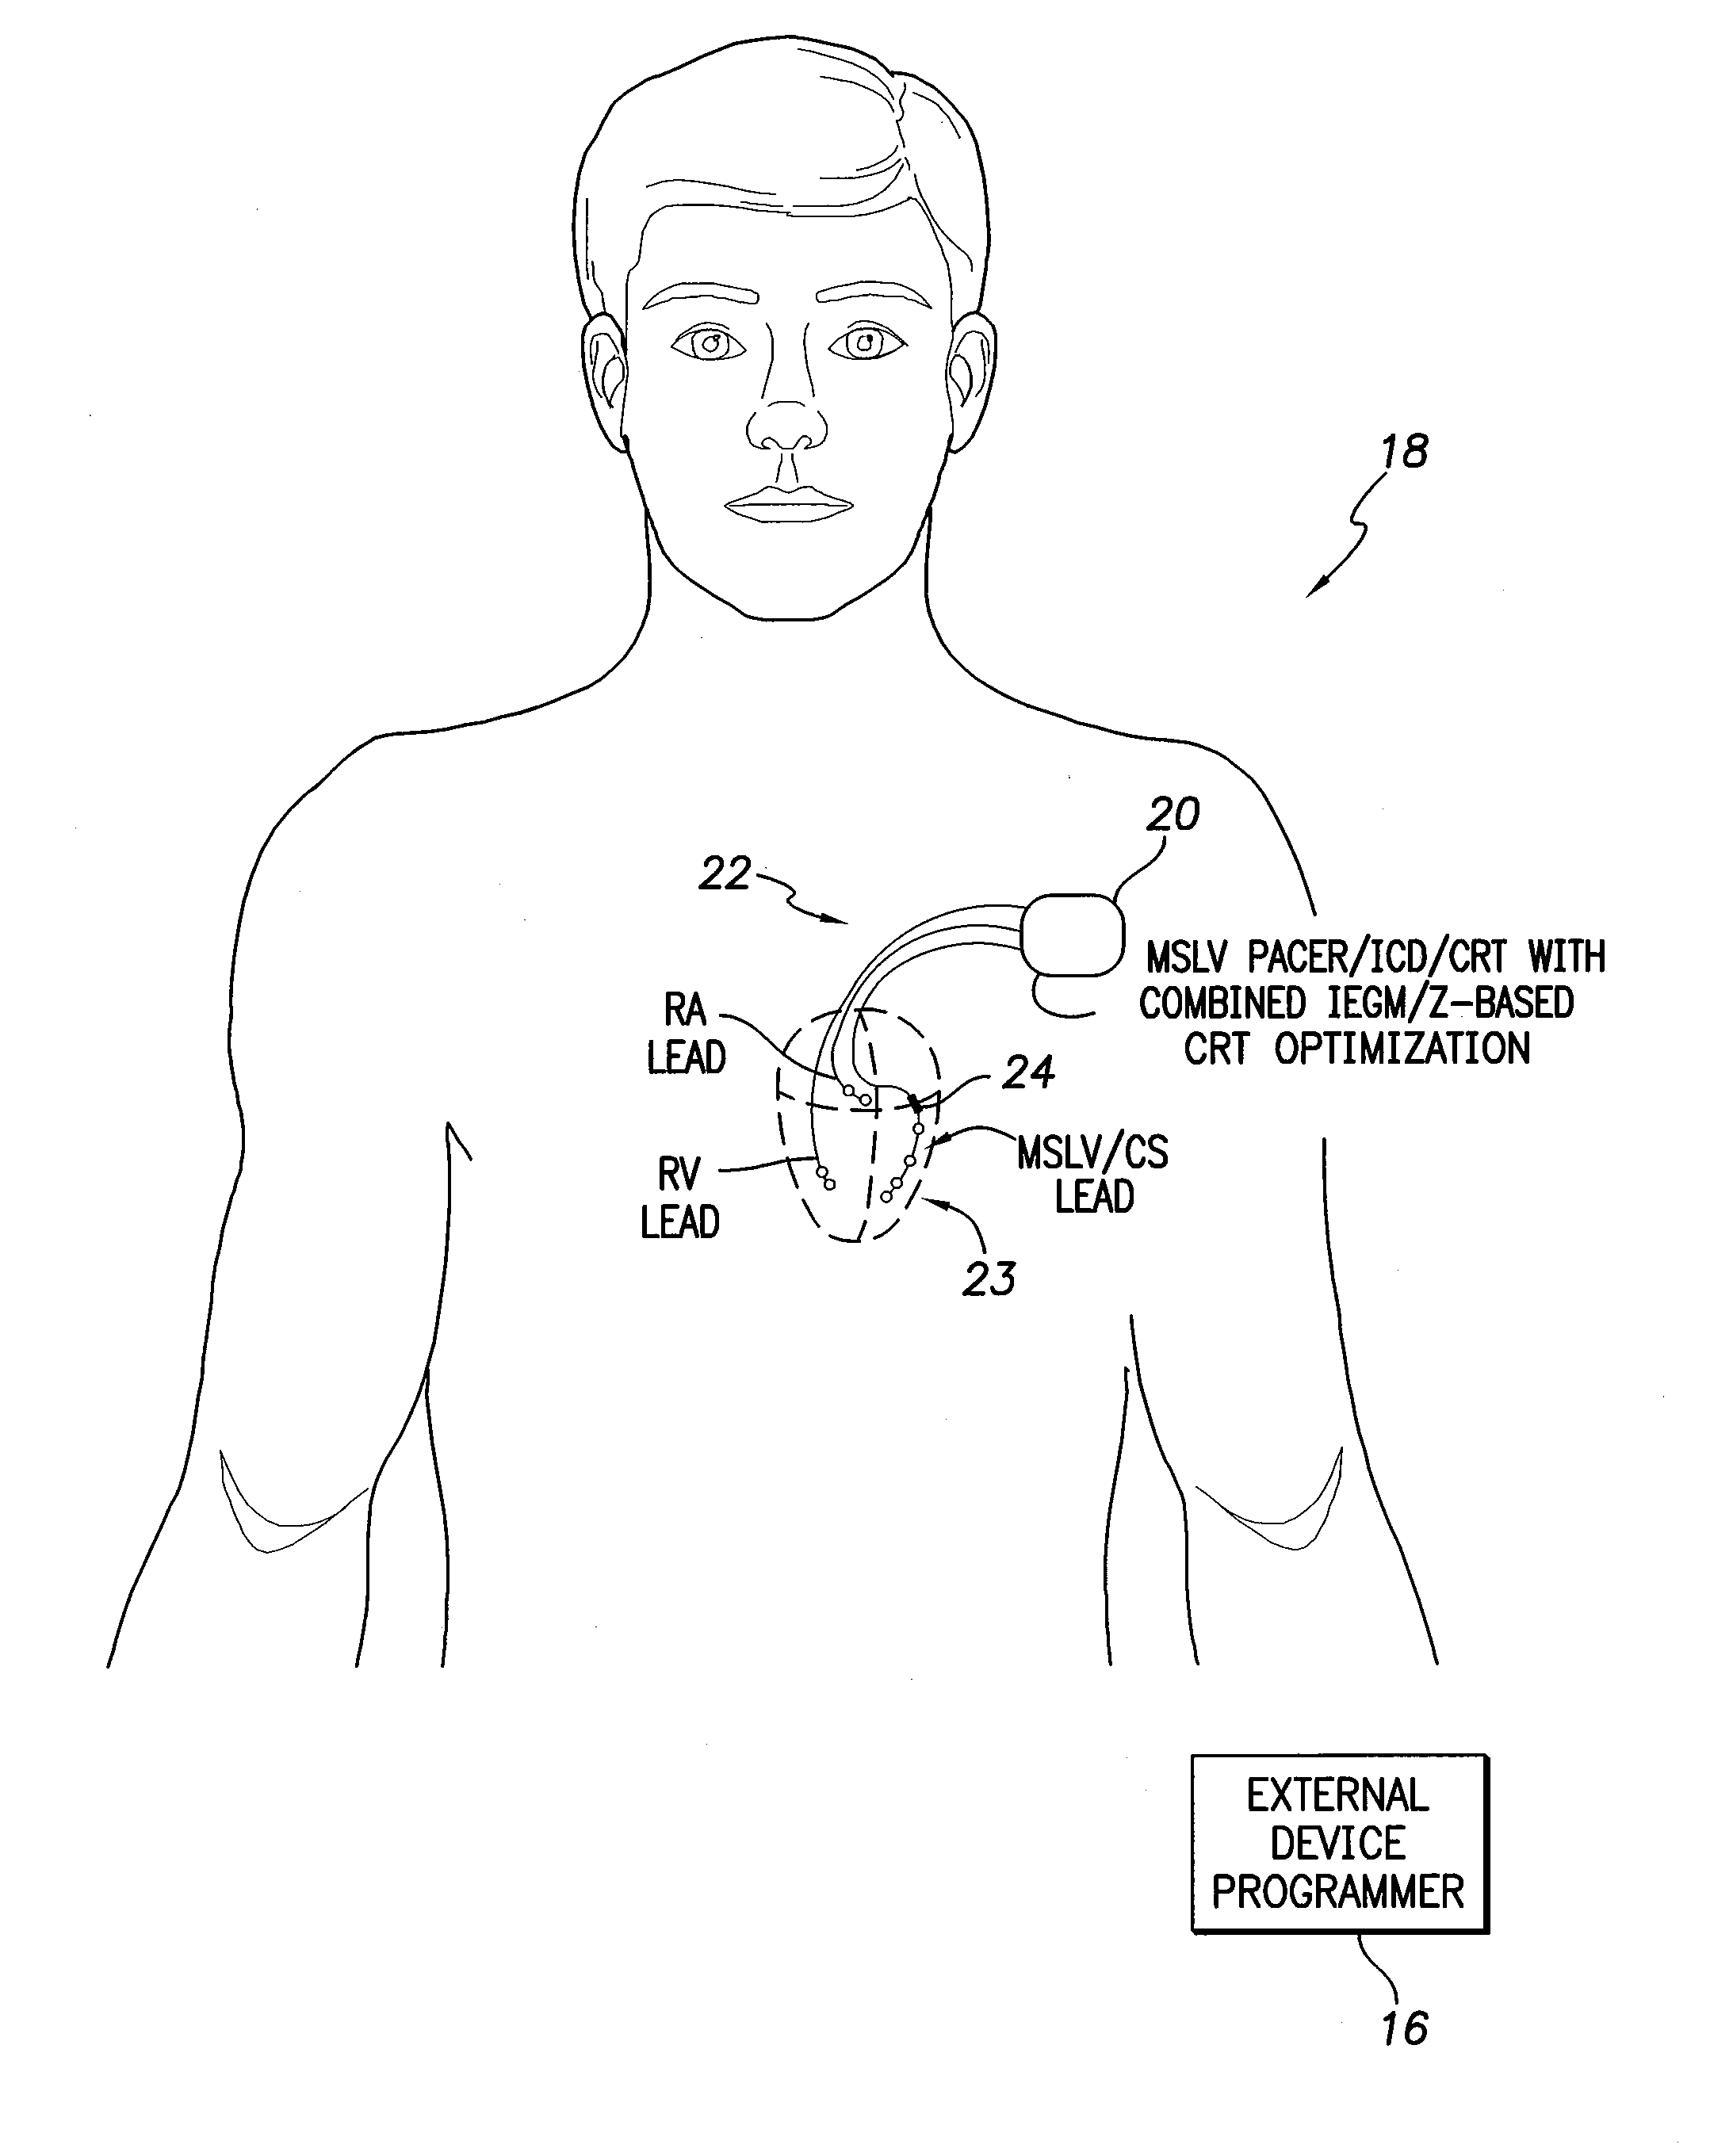 Systems and methods for optimizing AV/VV pacing delays using combined IEGM/impedance-based techniques for use with implantable medical devices